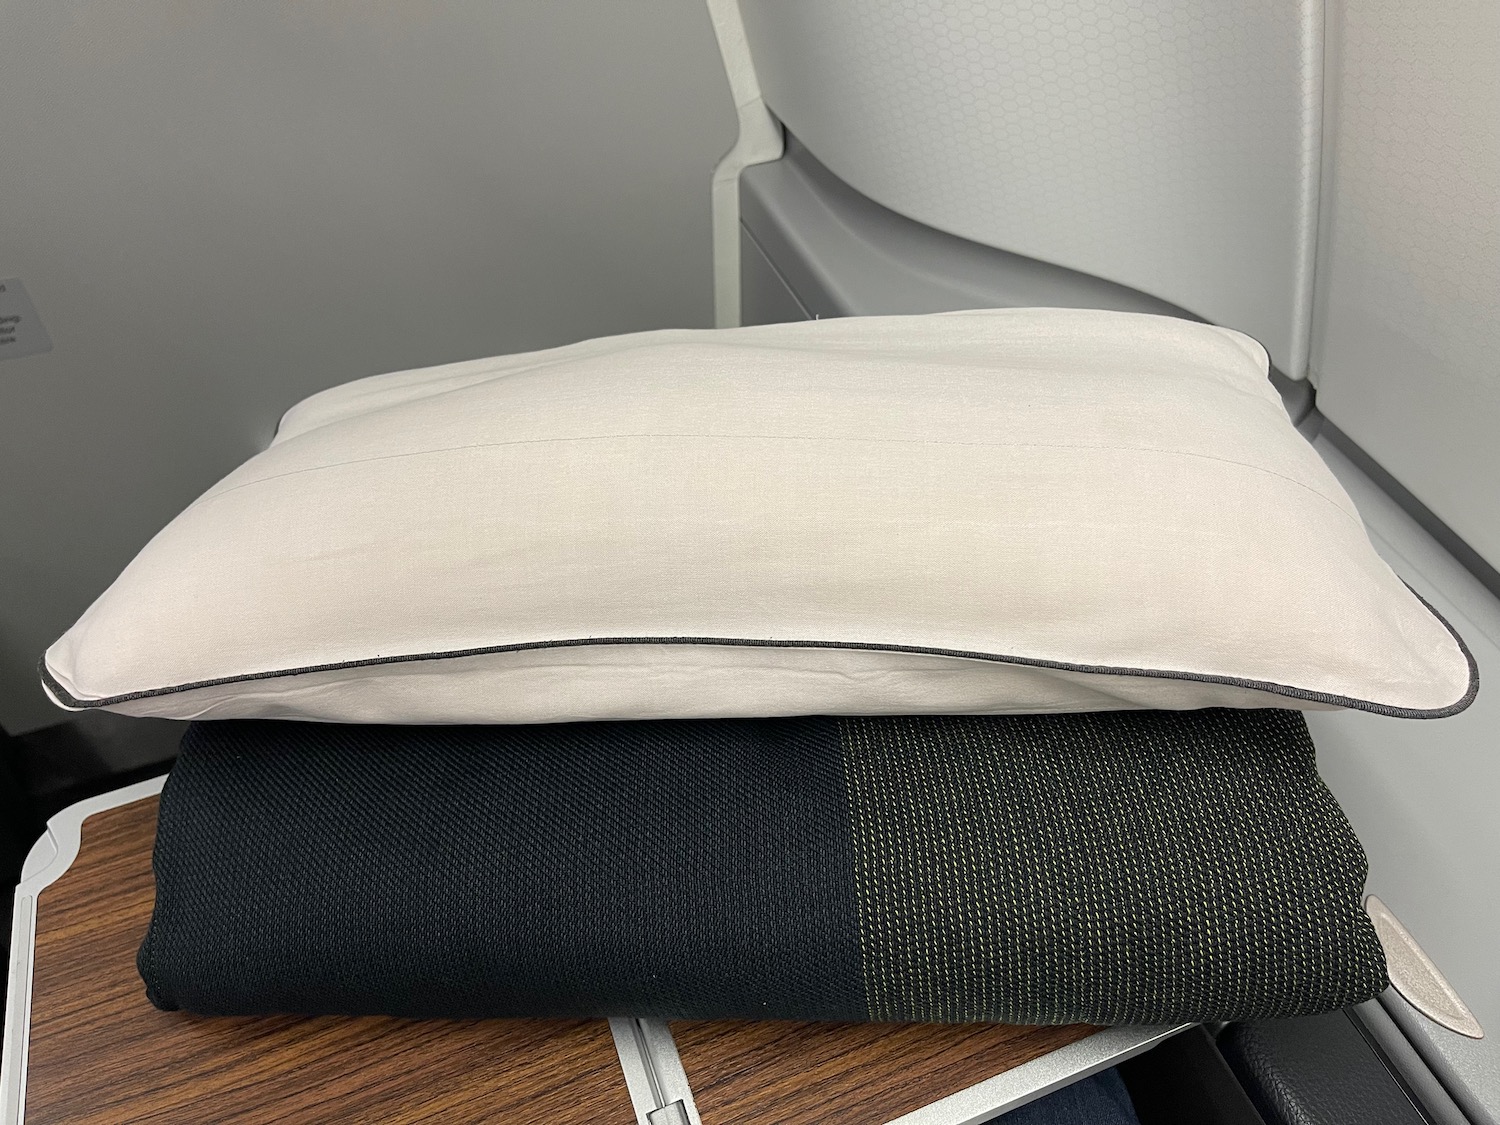 a pillow on a stack of pillows